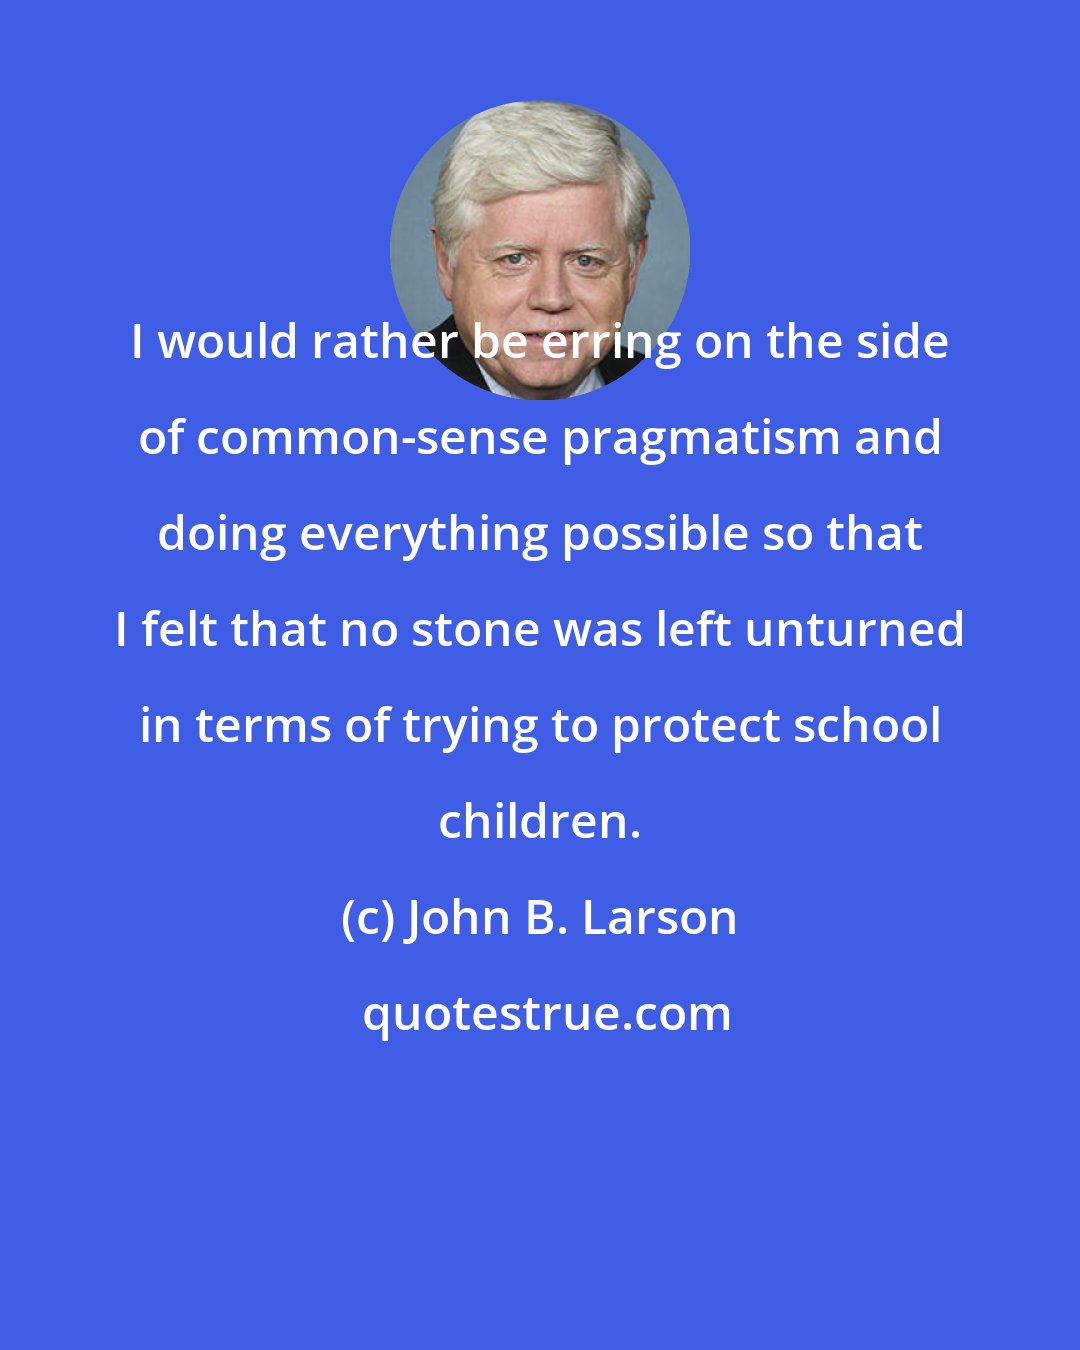 John B. Larson: I would rather be erring on the side of common-sense pragmatism and doing everything possible so that I felt that no stone was left unturned in terms of trying to protect school children.